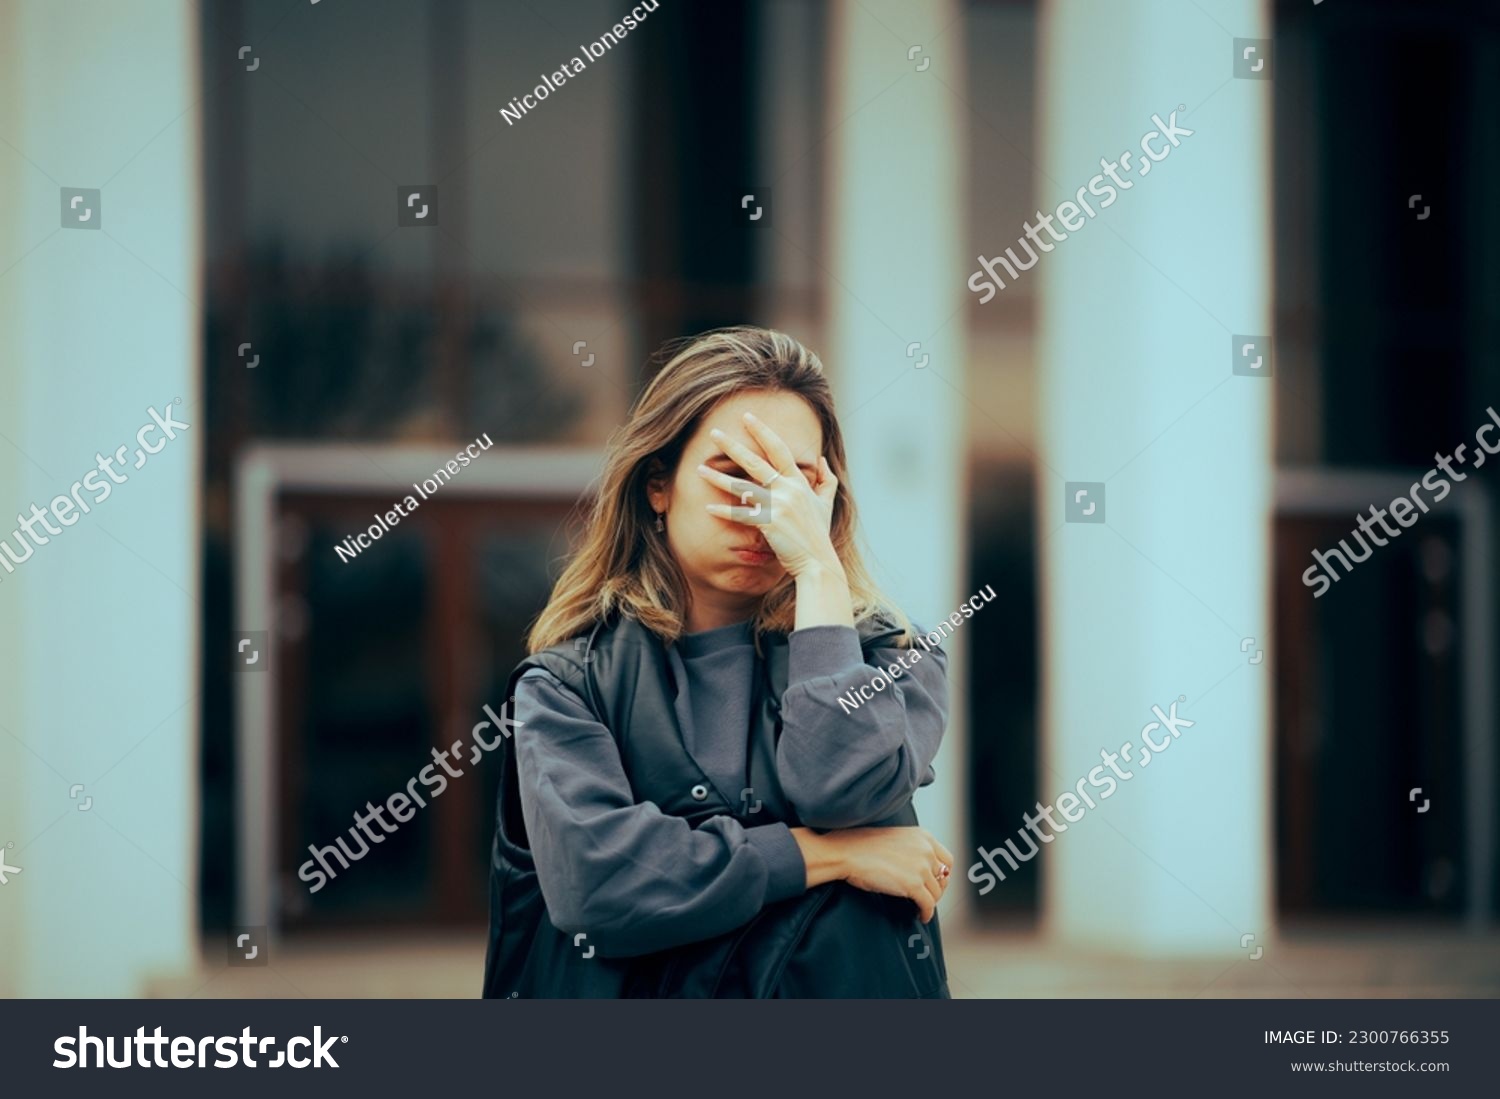 
Unhappy Woman Making Facepalm Gesture Waiting Outside. Stressed person having a breakdown regret crisis
 #2300766355